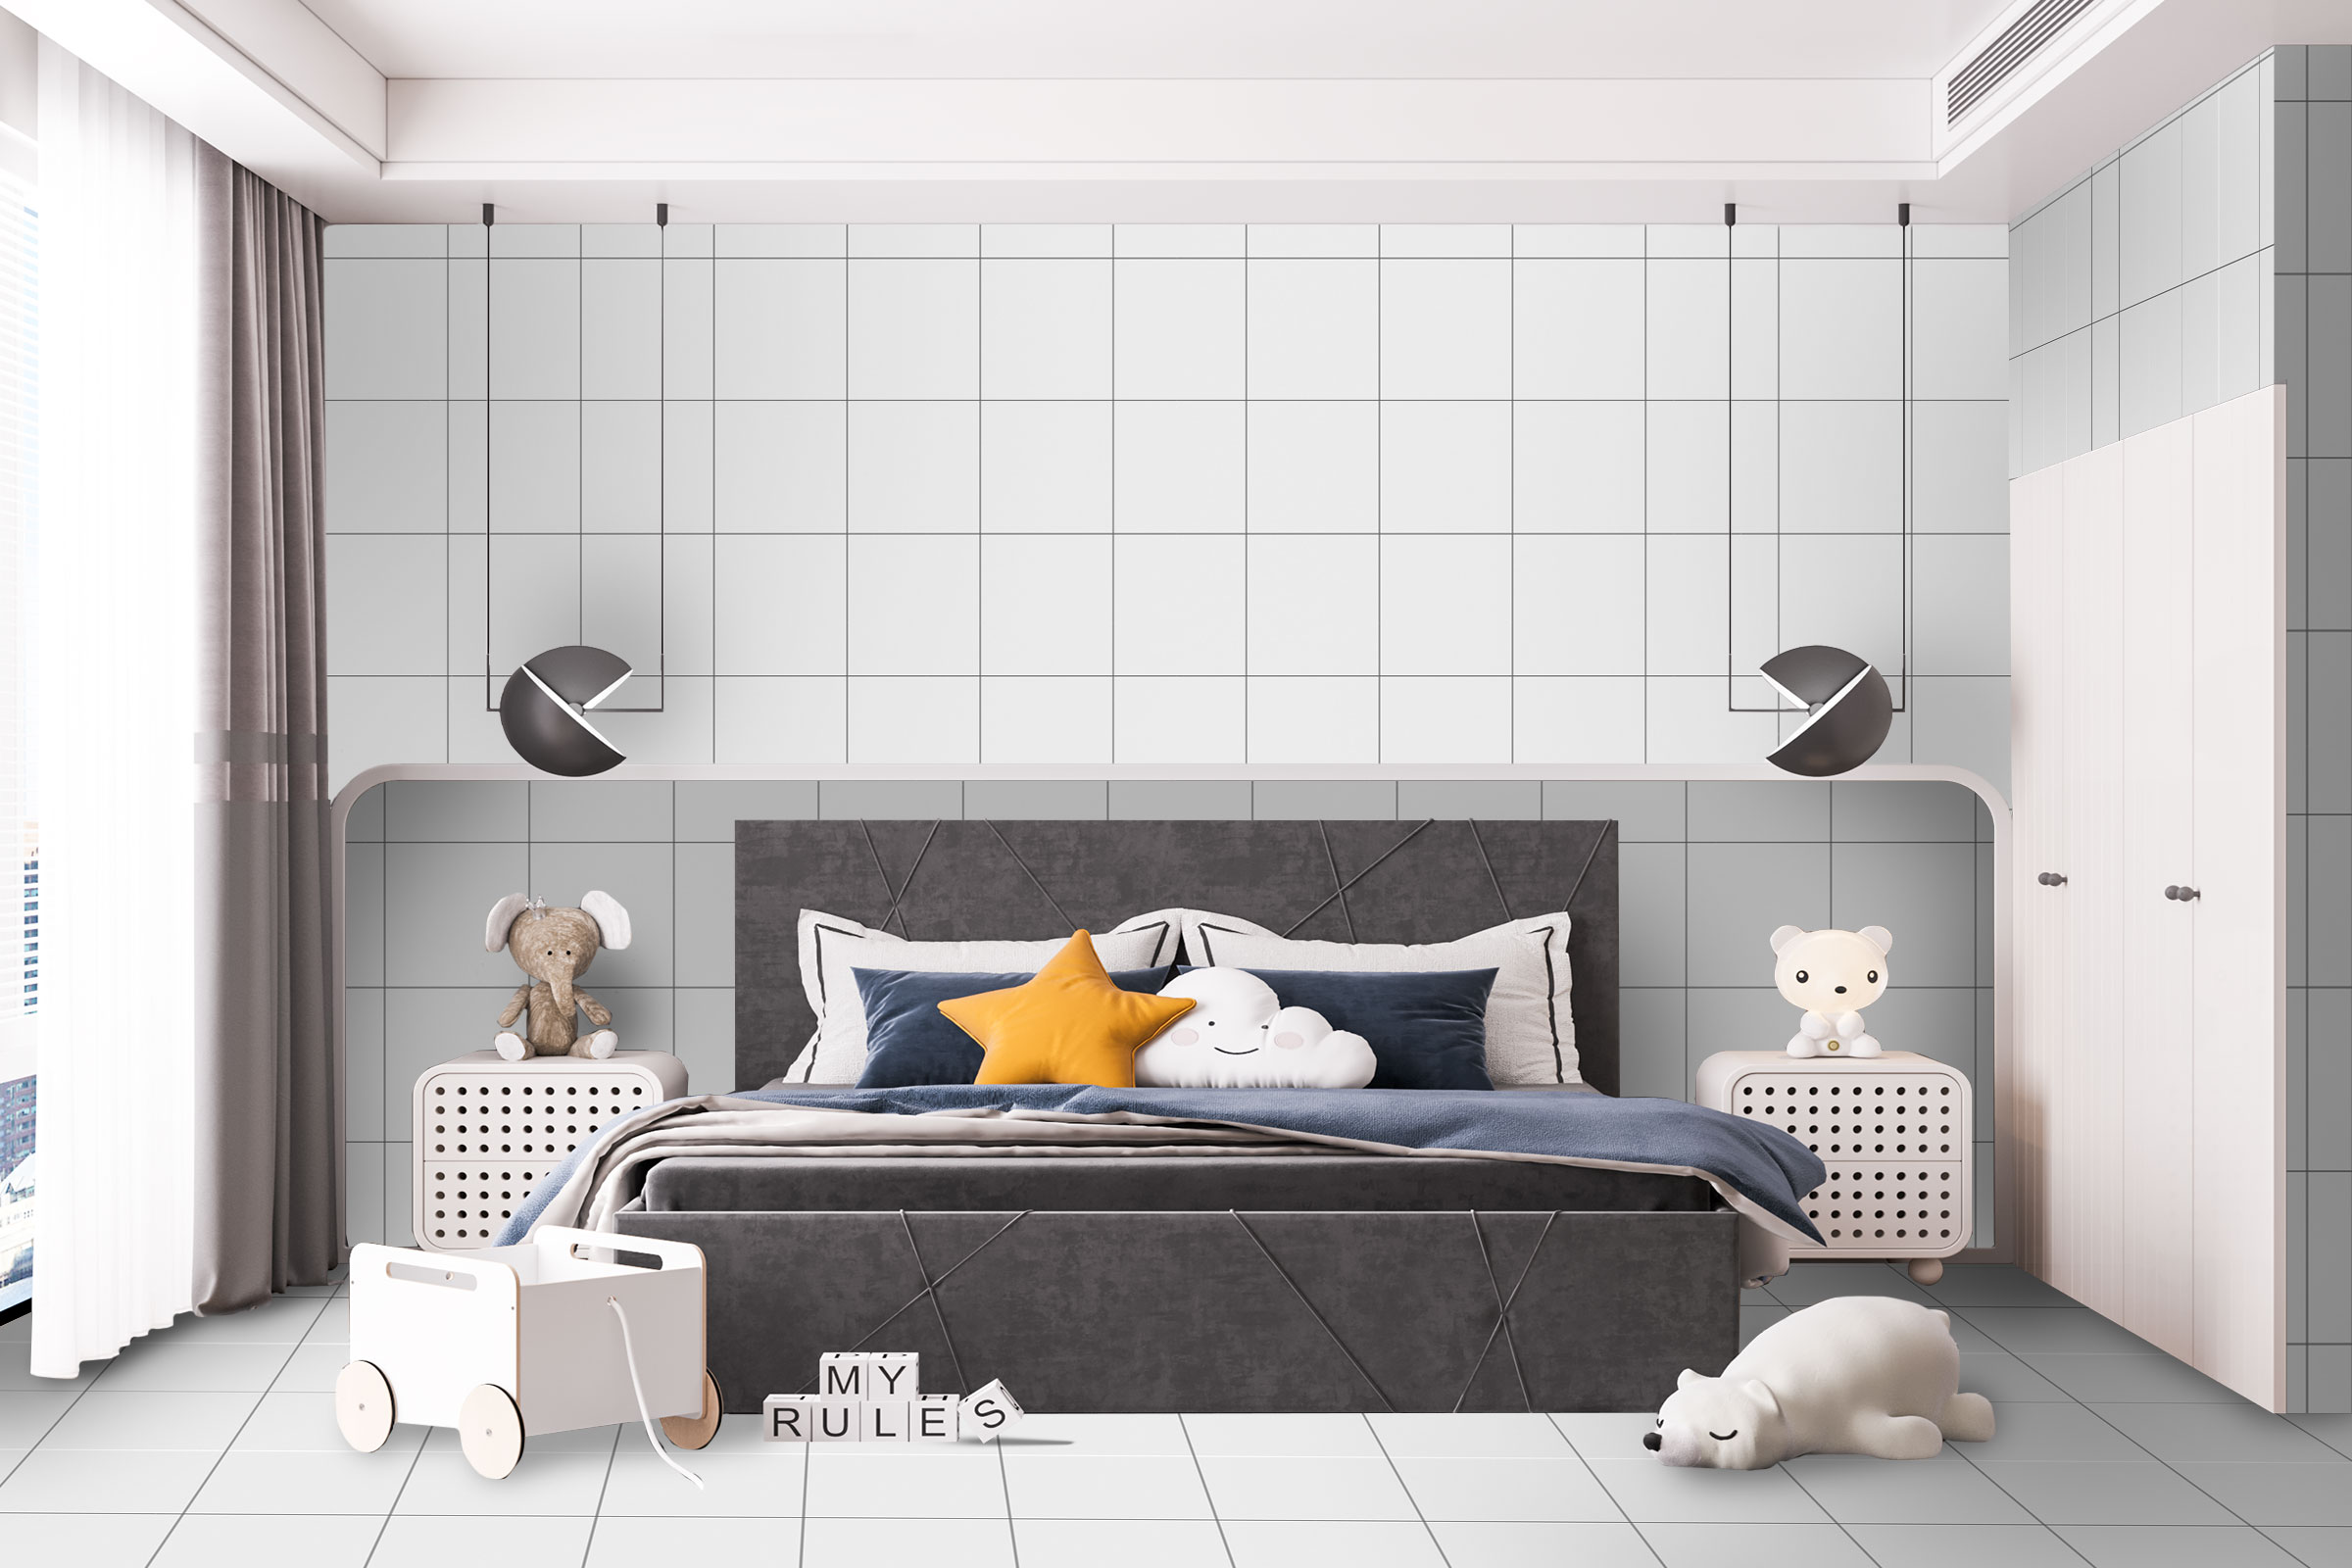 Create the perfect bedroom for your children with large-format porcelain stoneware tiles from the Epic Surface brand